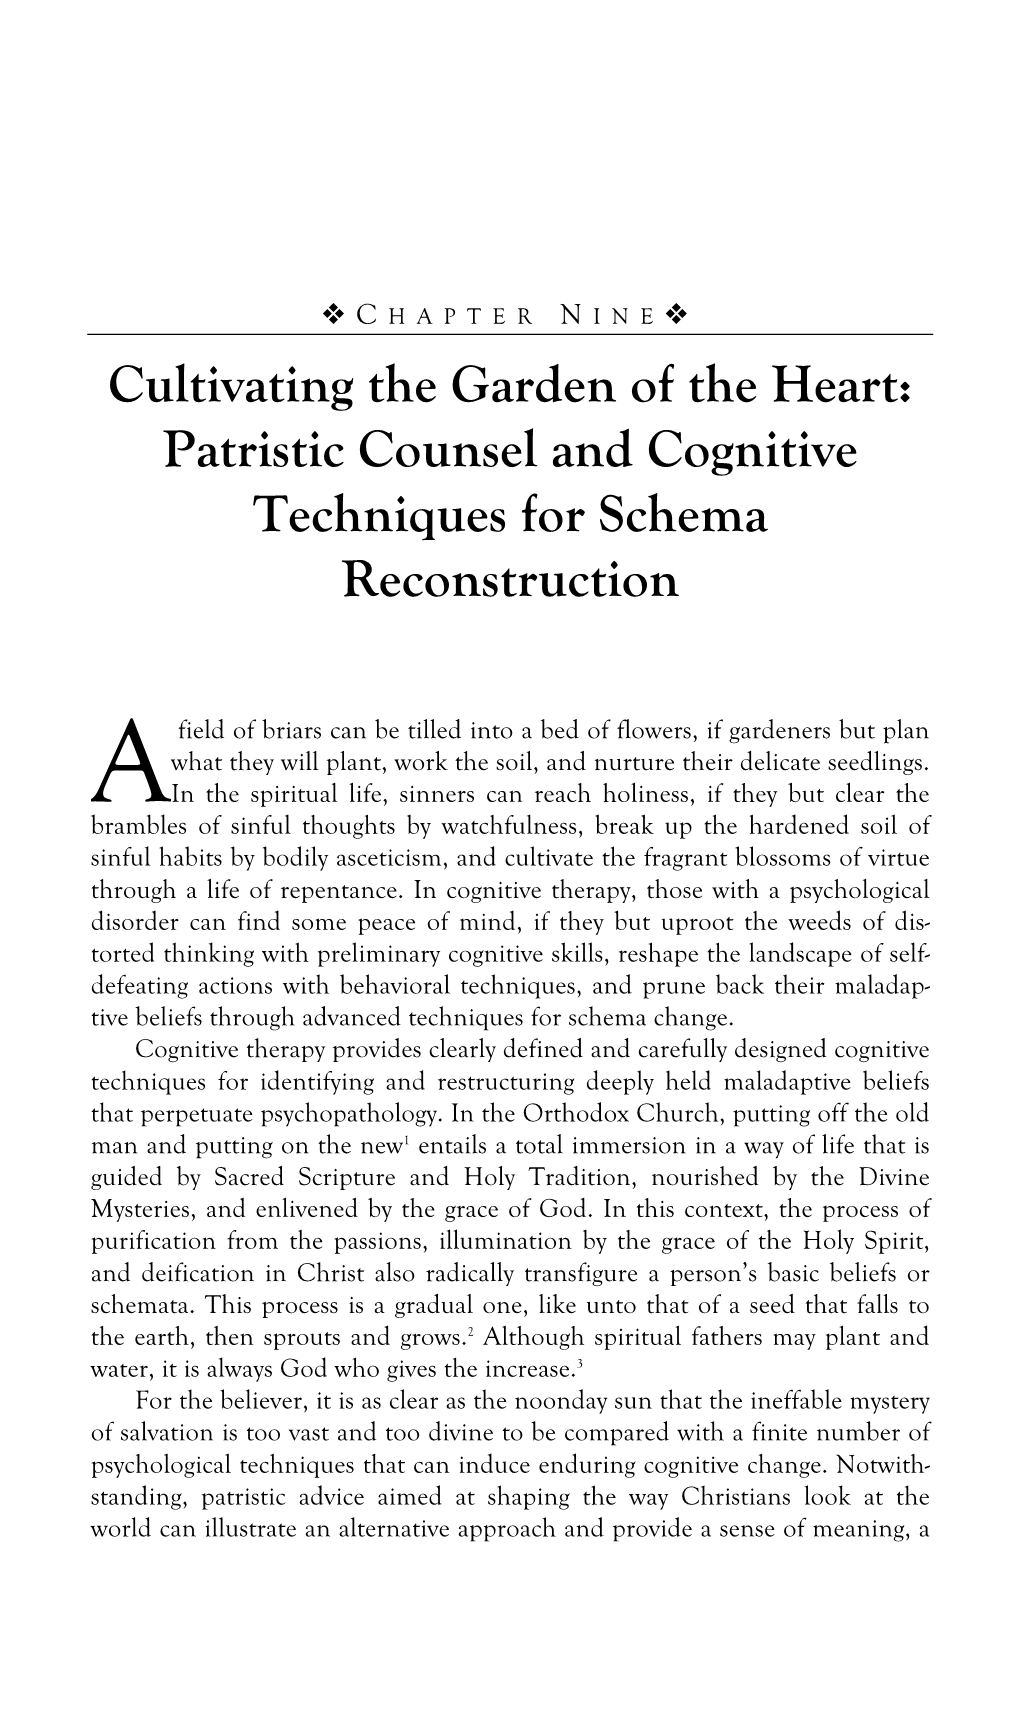 Cultivating the Garden of the Heart: Patristic Counsel and Cognitive Techniques for Schema Reconstruction